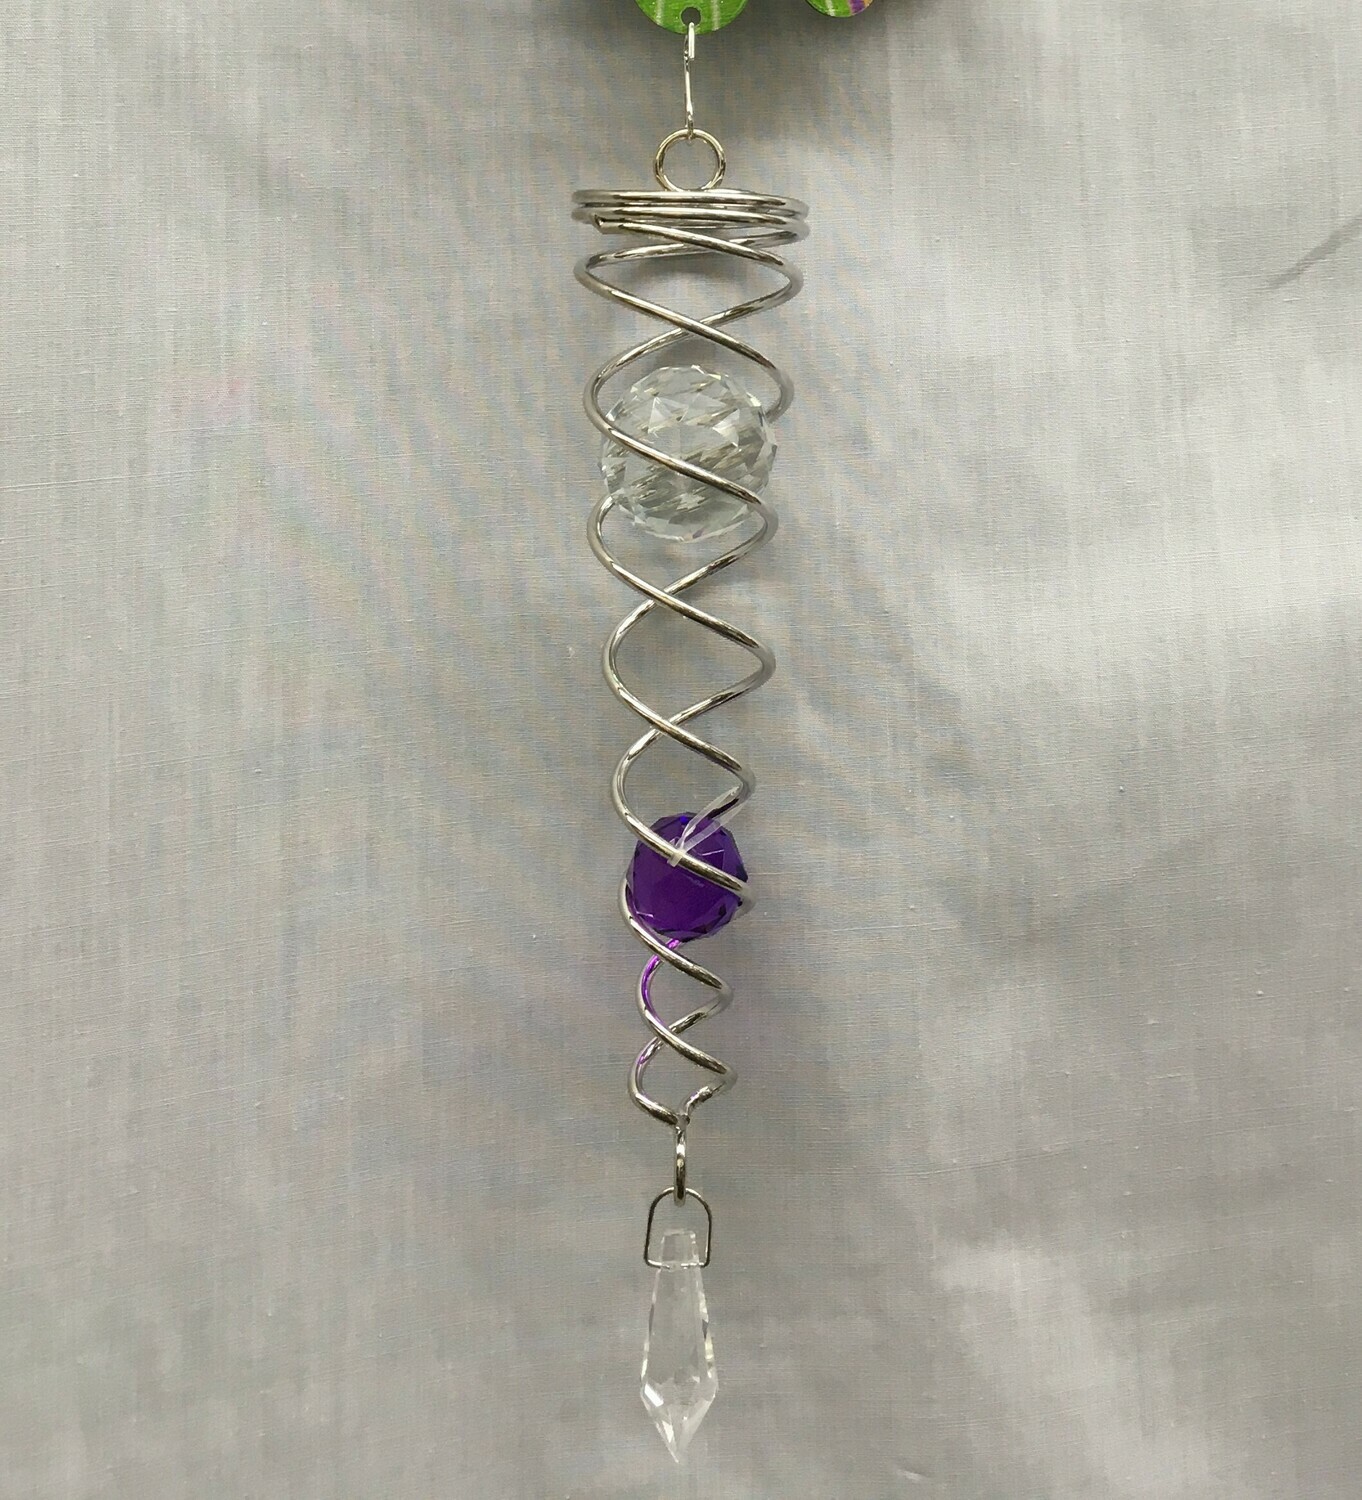 Small Spiral Tail - Purple and Clear crystal balls